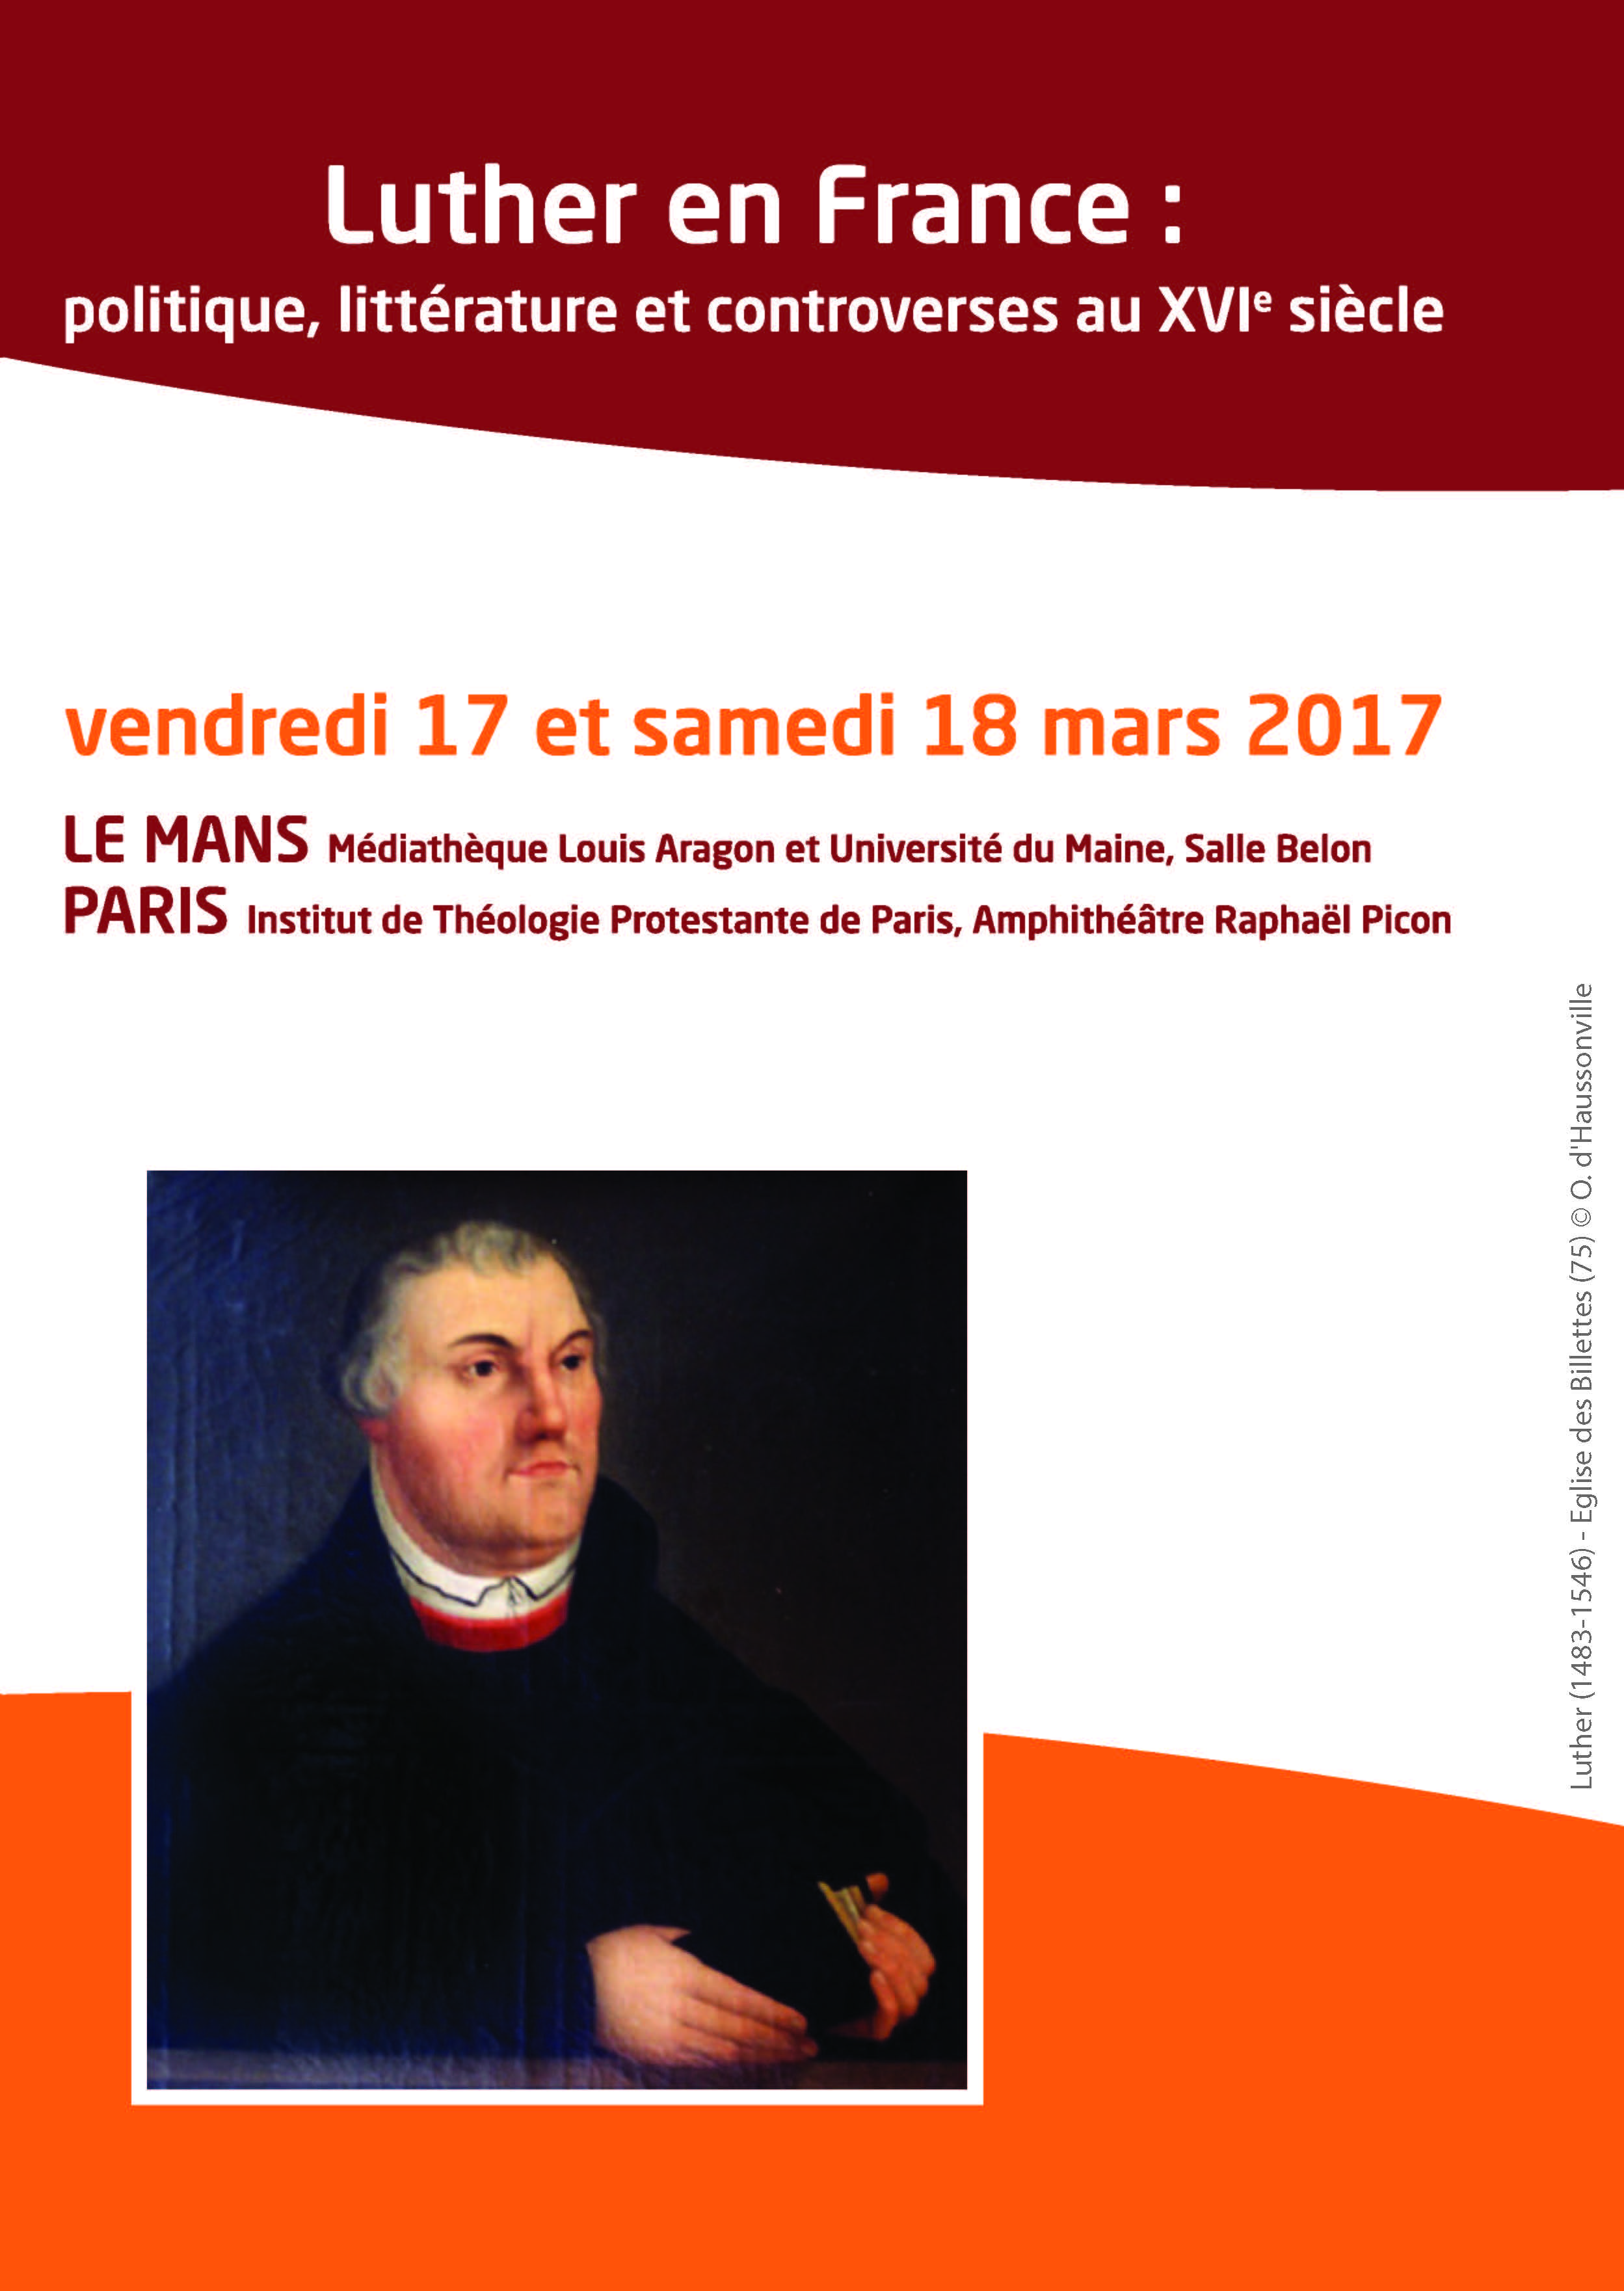 luther flyer 17 18 mars 2017